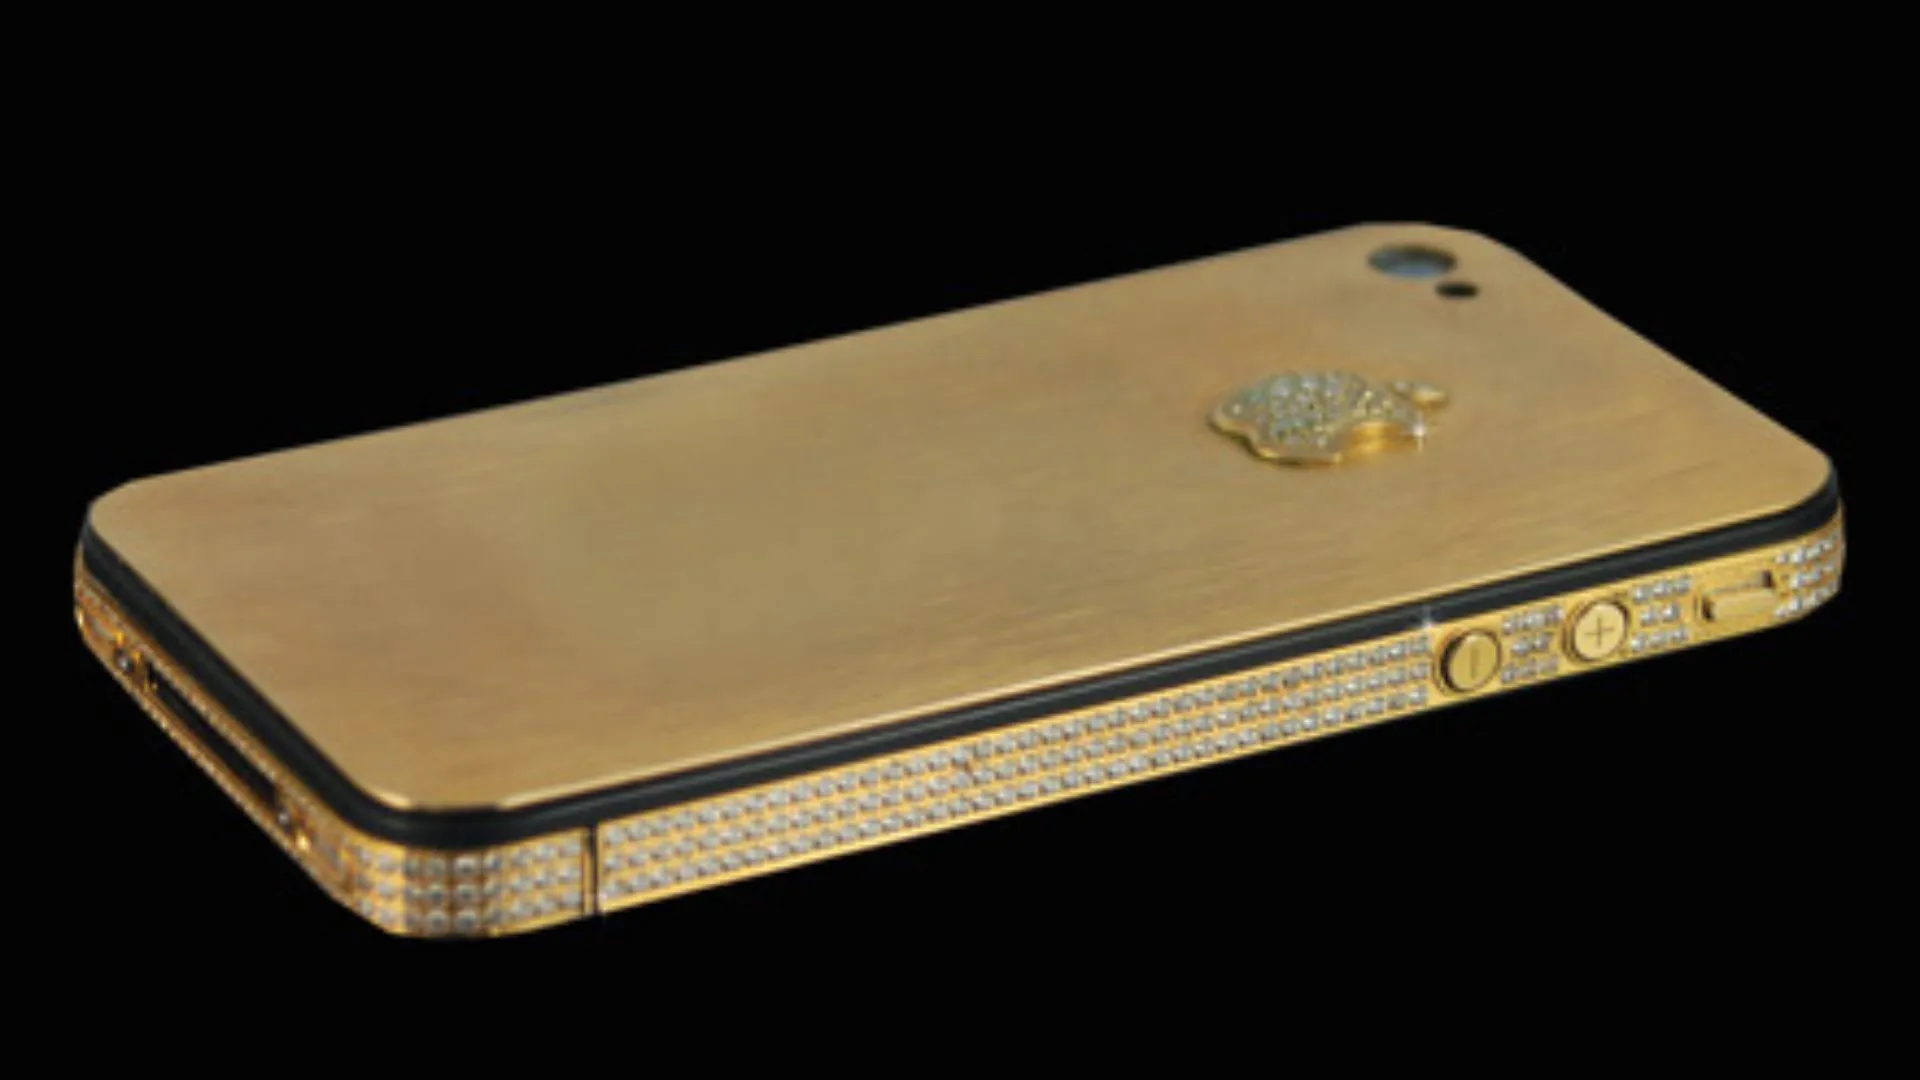 What Is The Most Expensive Phone In The World? | CellularNews